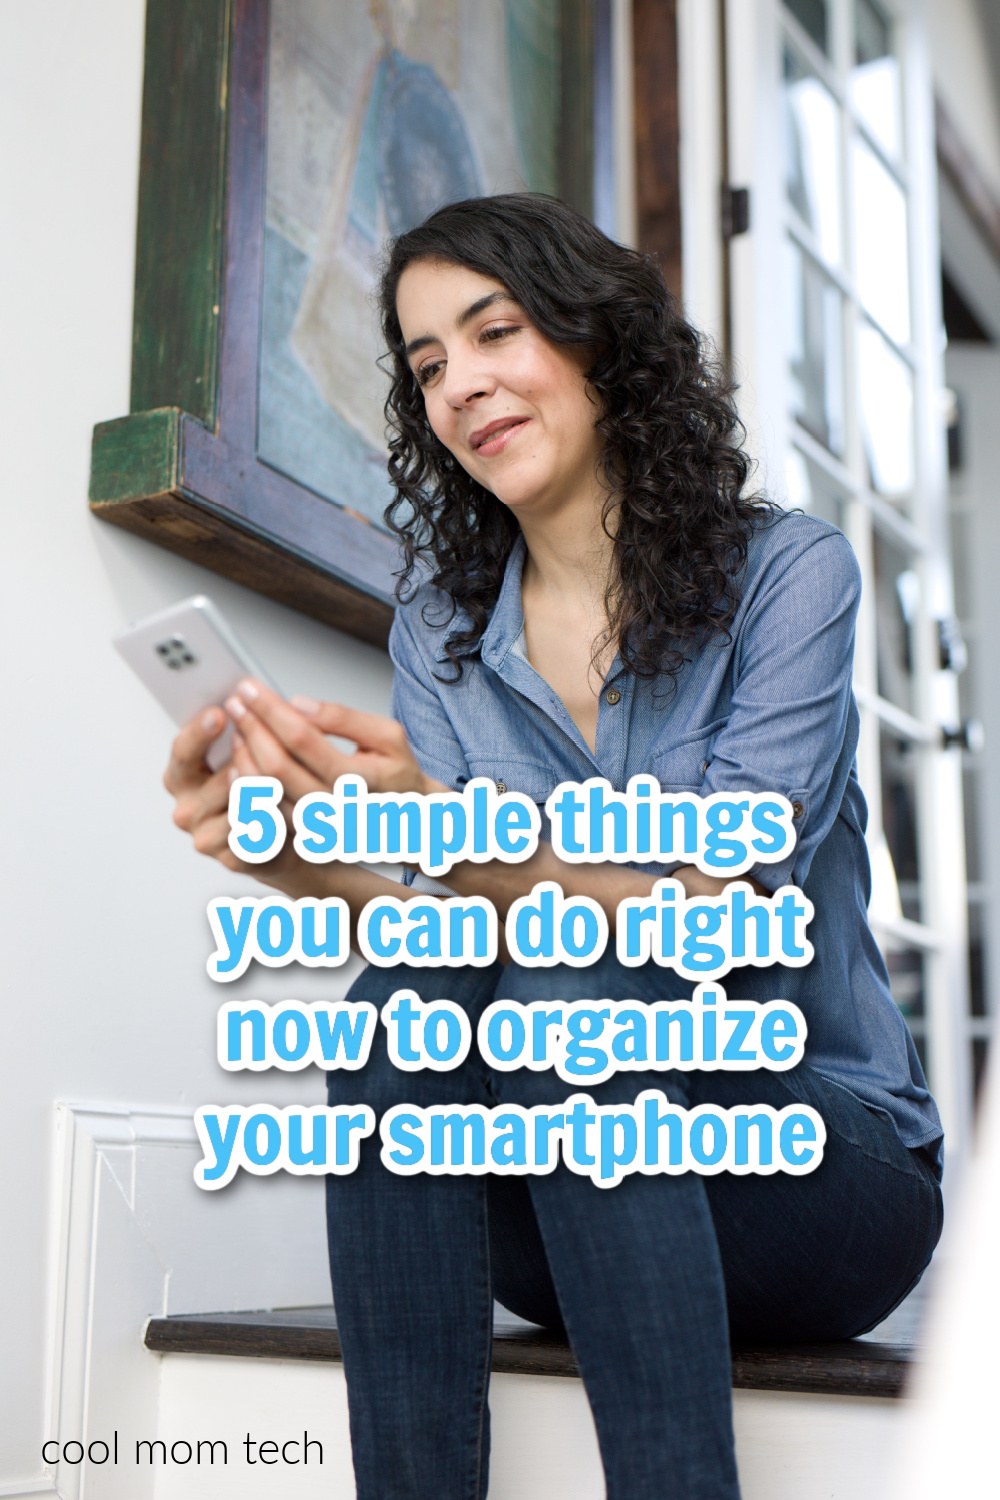 5 simple things you can do to organize your smartphone | Cool Mom Tech